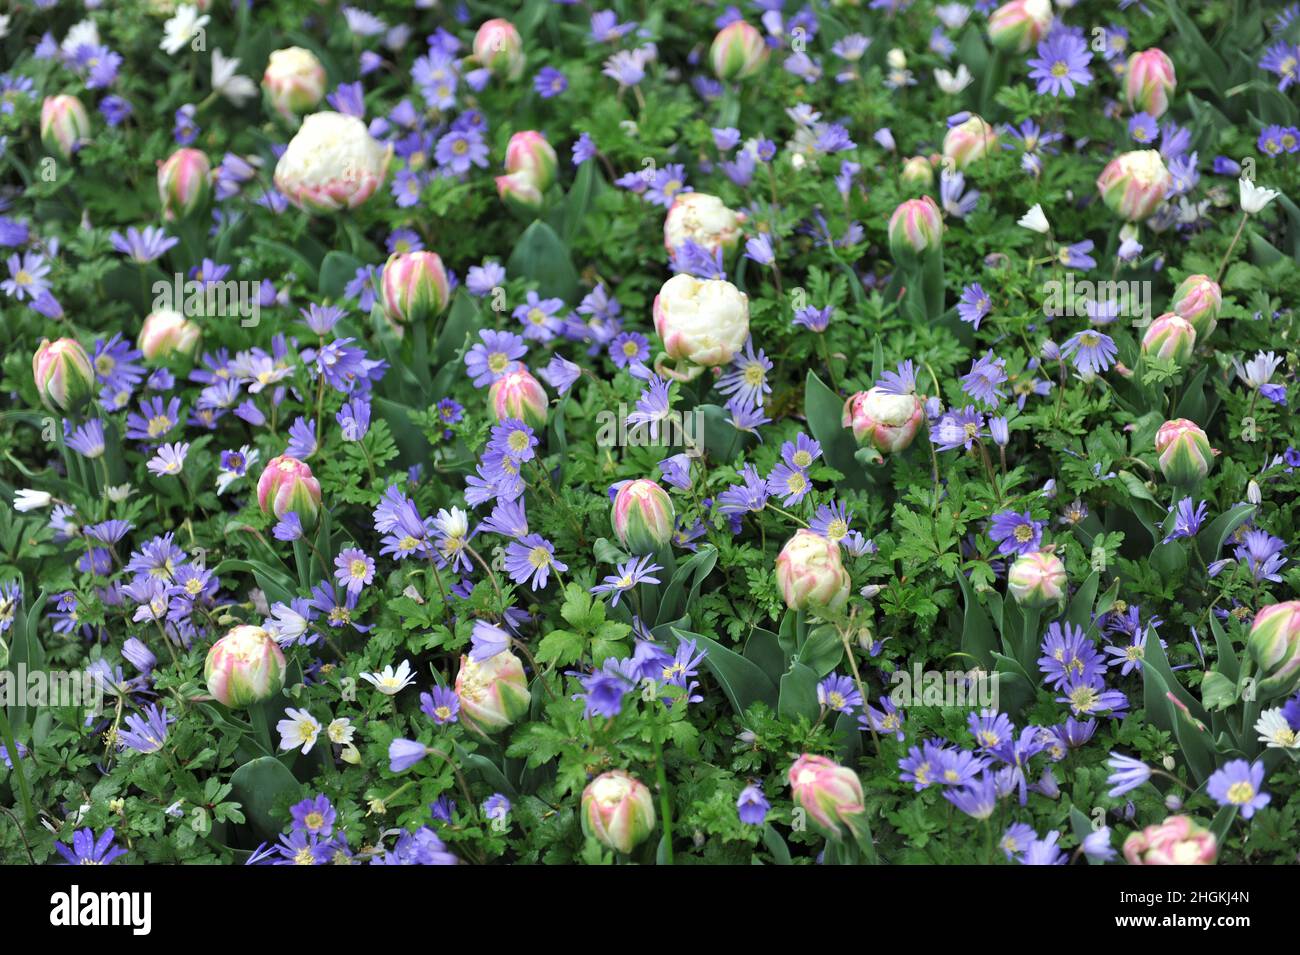 White with pink blush peony-flowered tulips (Tulipa) Ice Cream and winter windflower (Anemone blanda) bloom in a garden in April Stock Photo